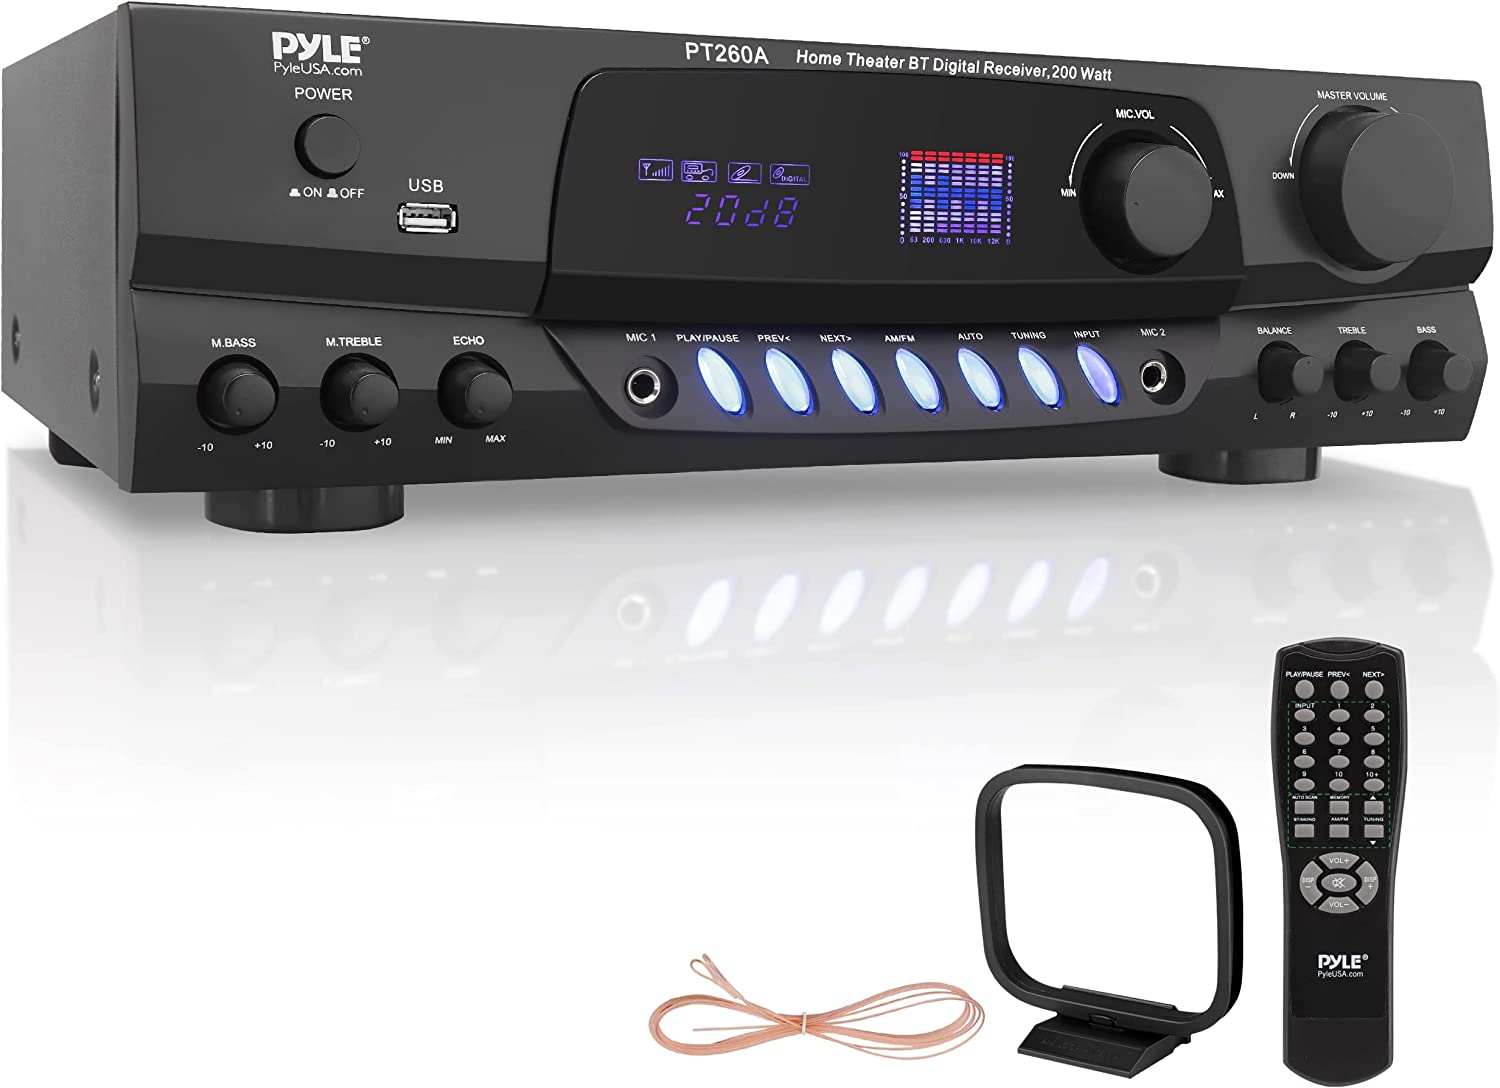 Pyle PT260A 200W 8-Ohm Home Digital AM FM Stereo Receiver Theater Audio, Black - image 1 of 6